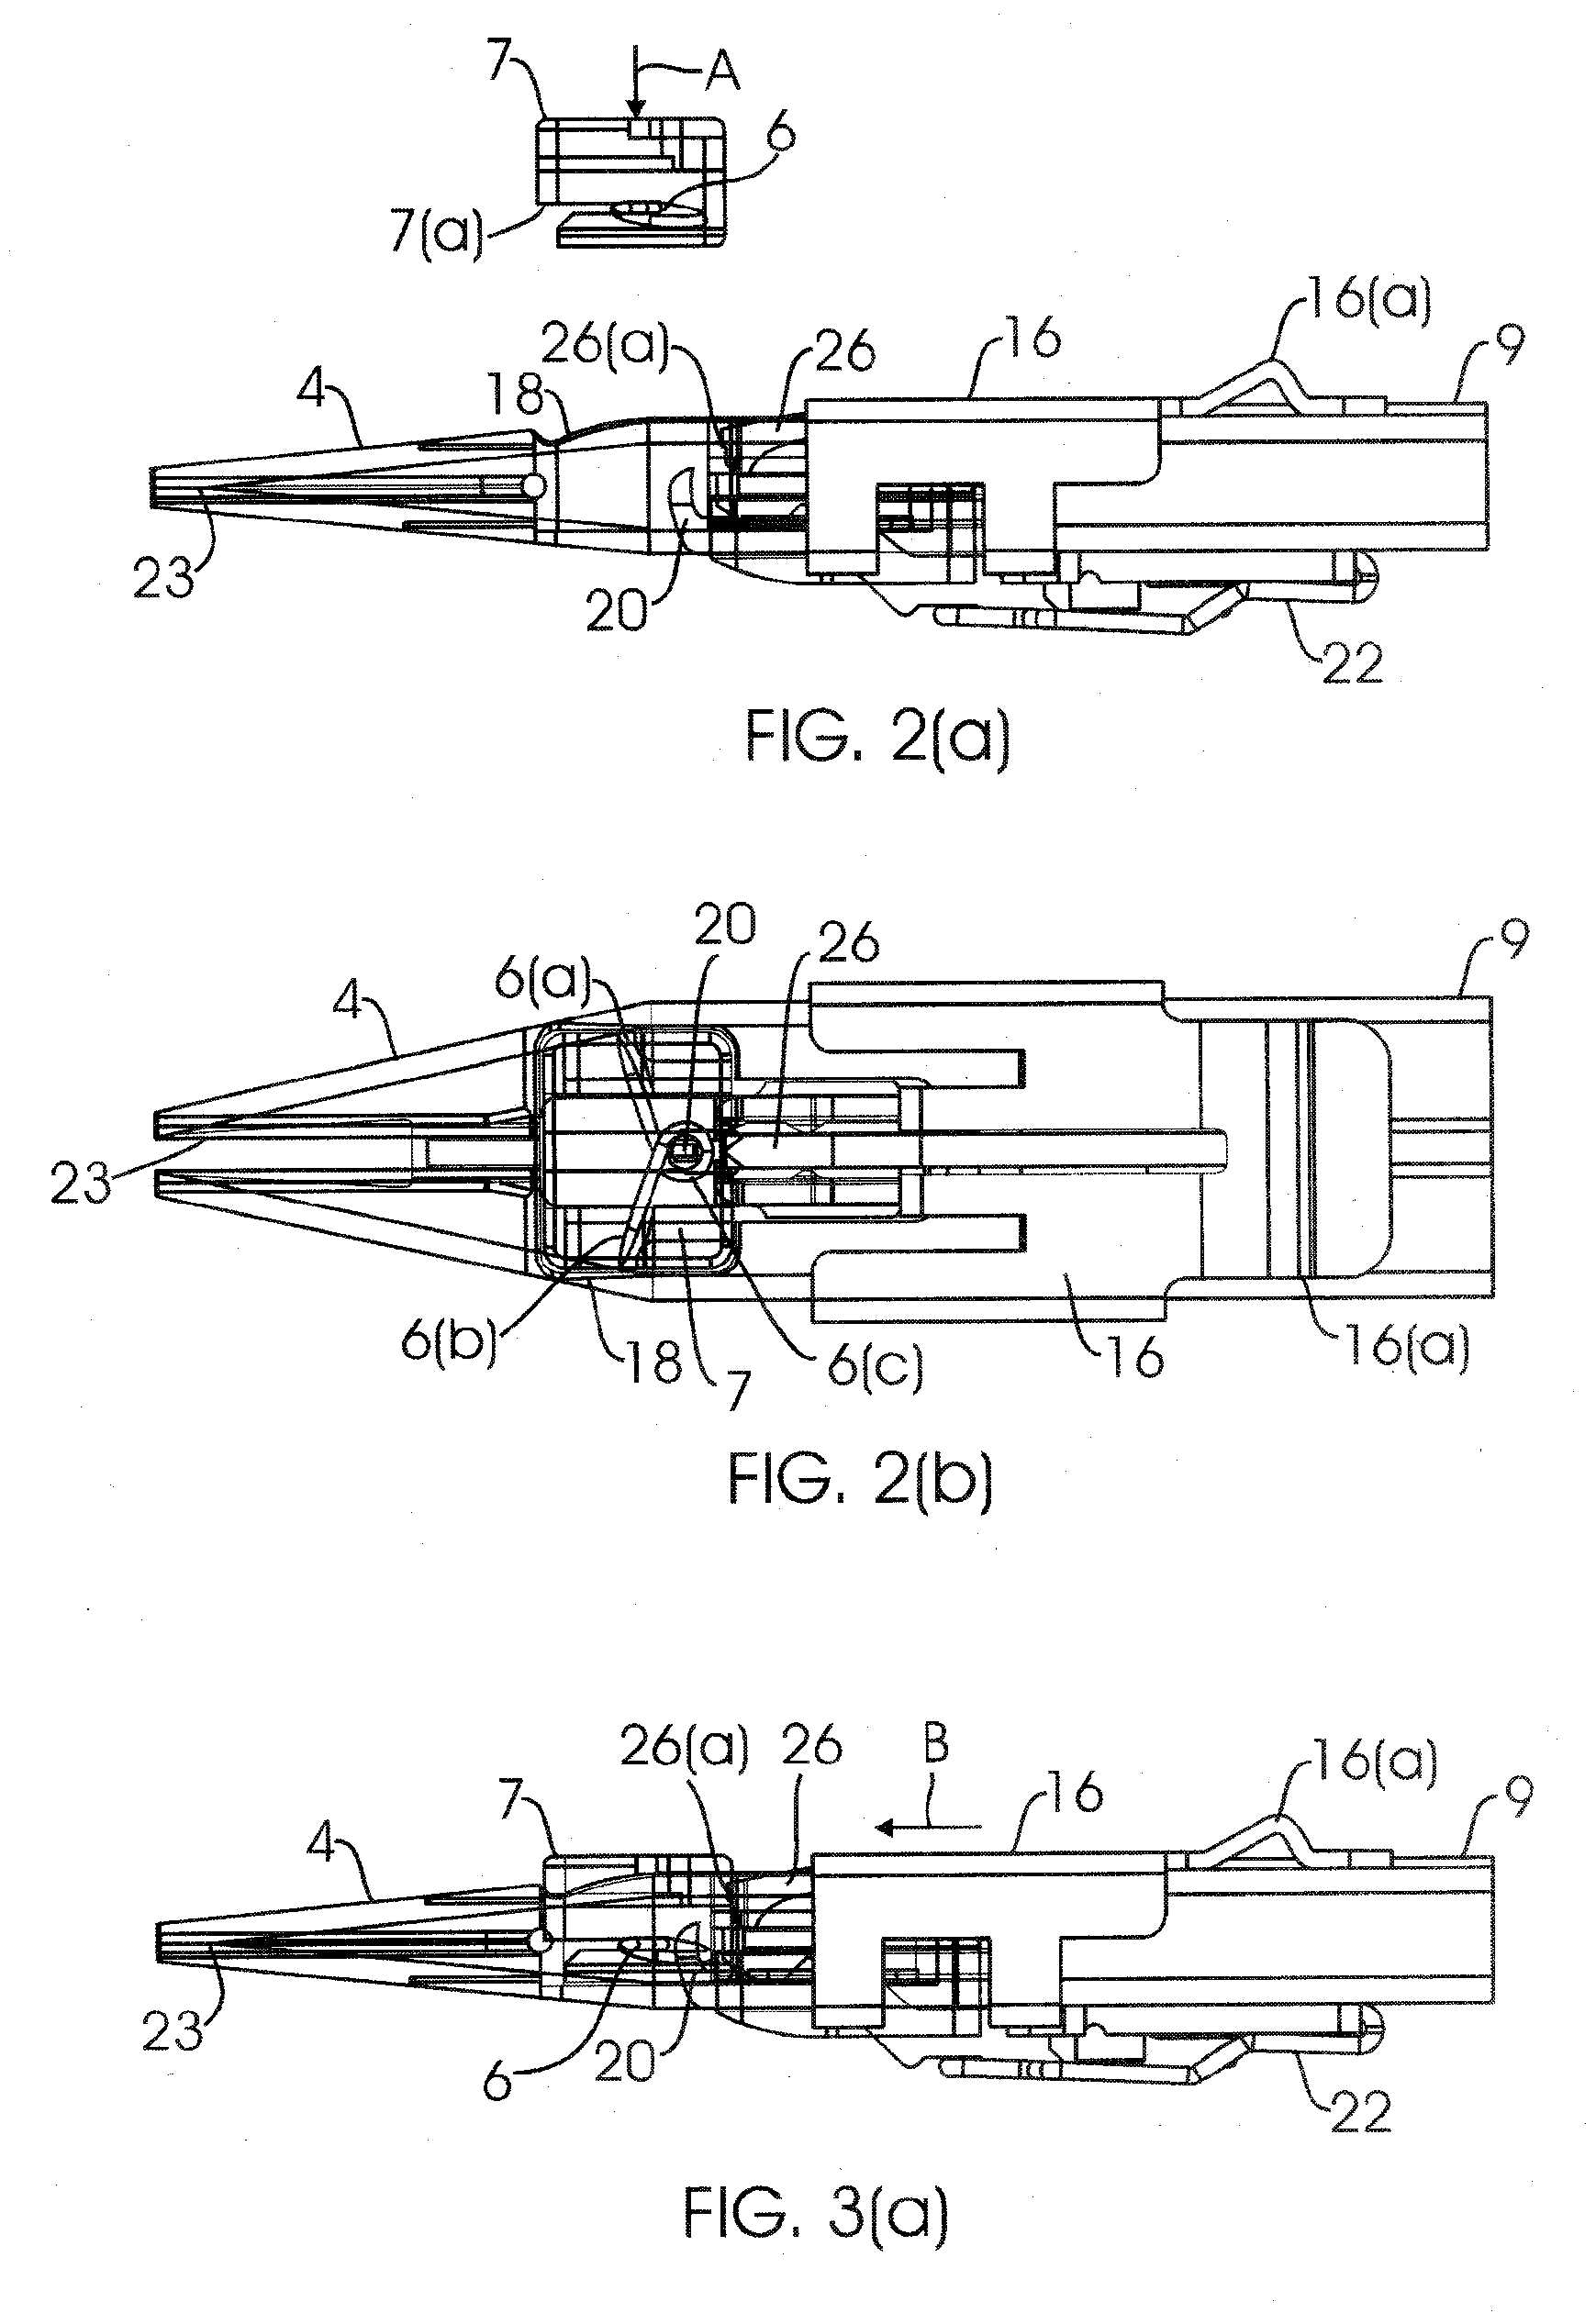 Apparatus and methods for delivering fasteners during valve replacement